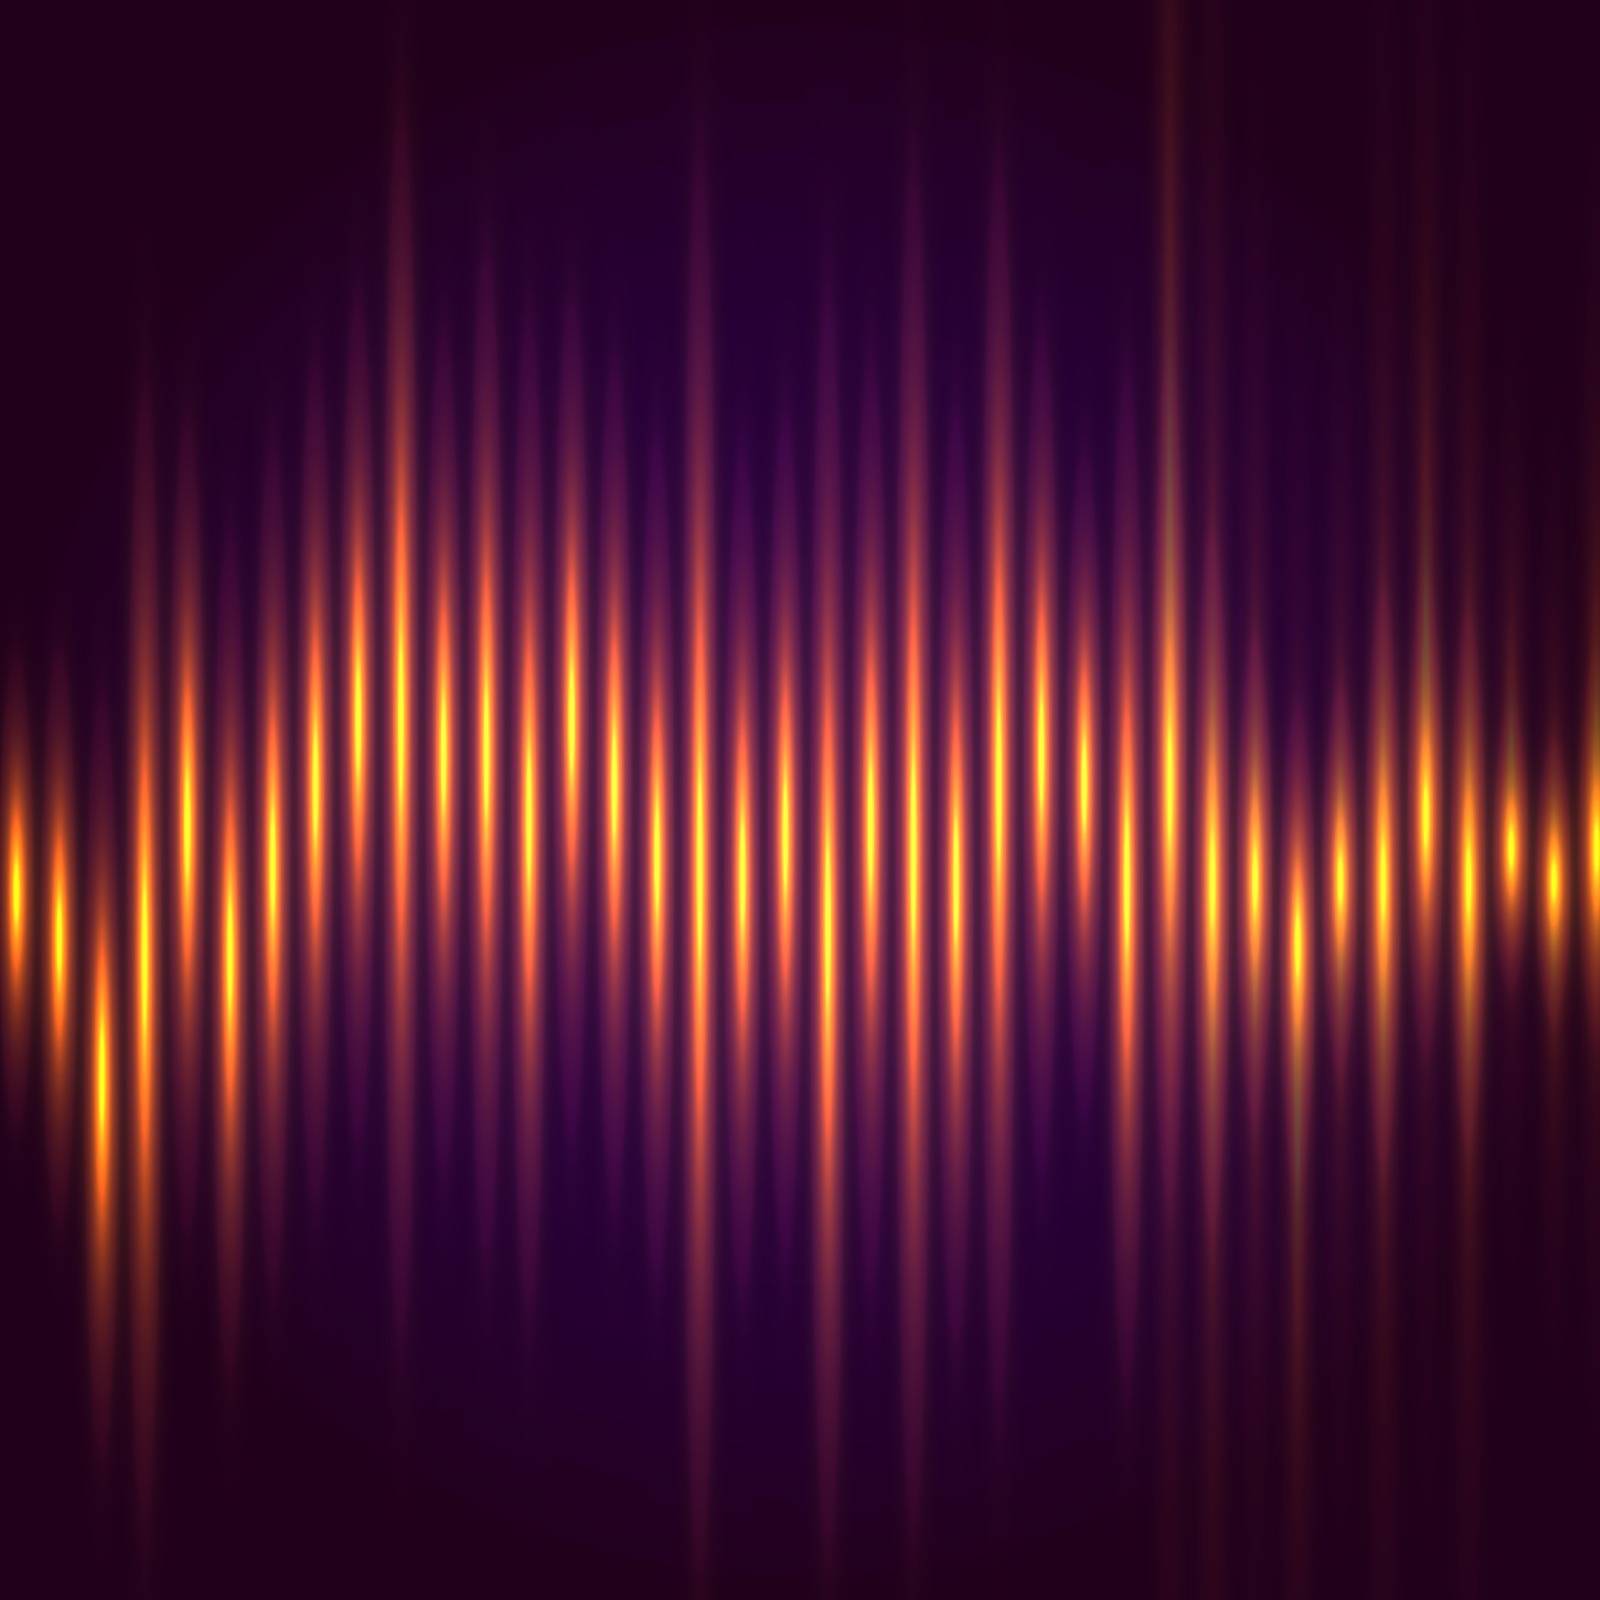 Abstract music equalizer, wave style vector background